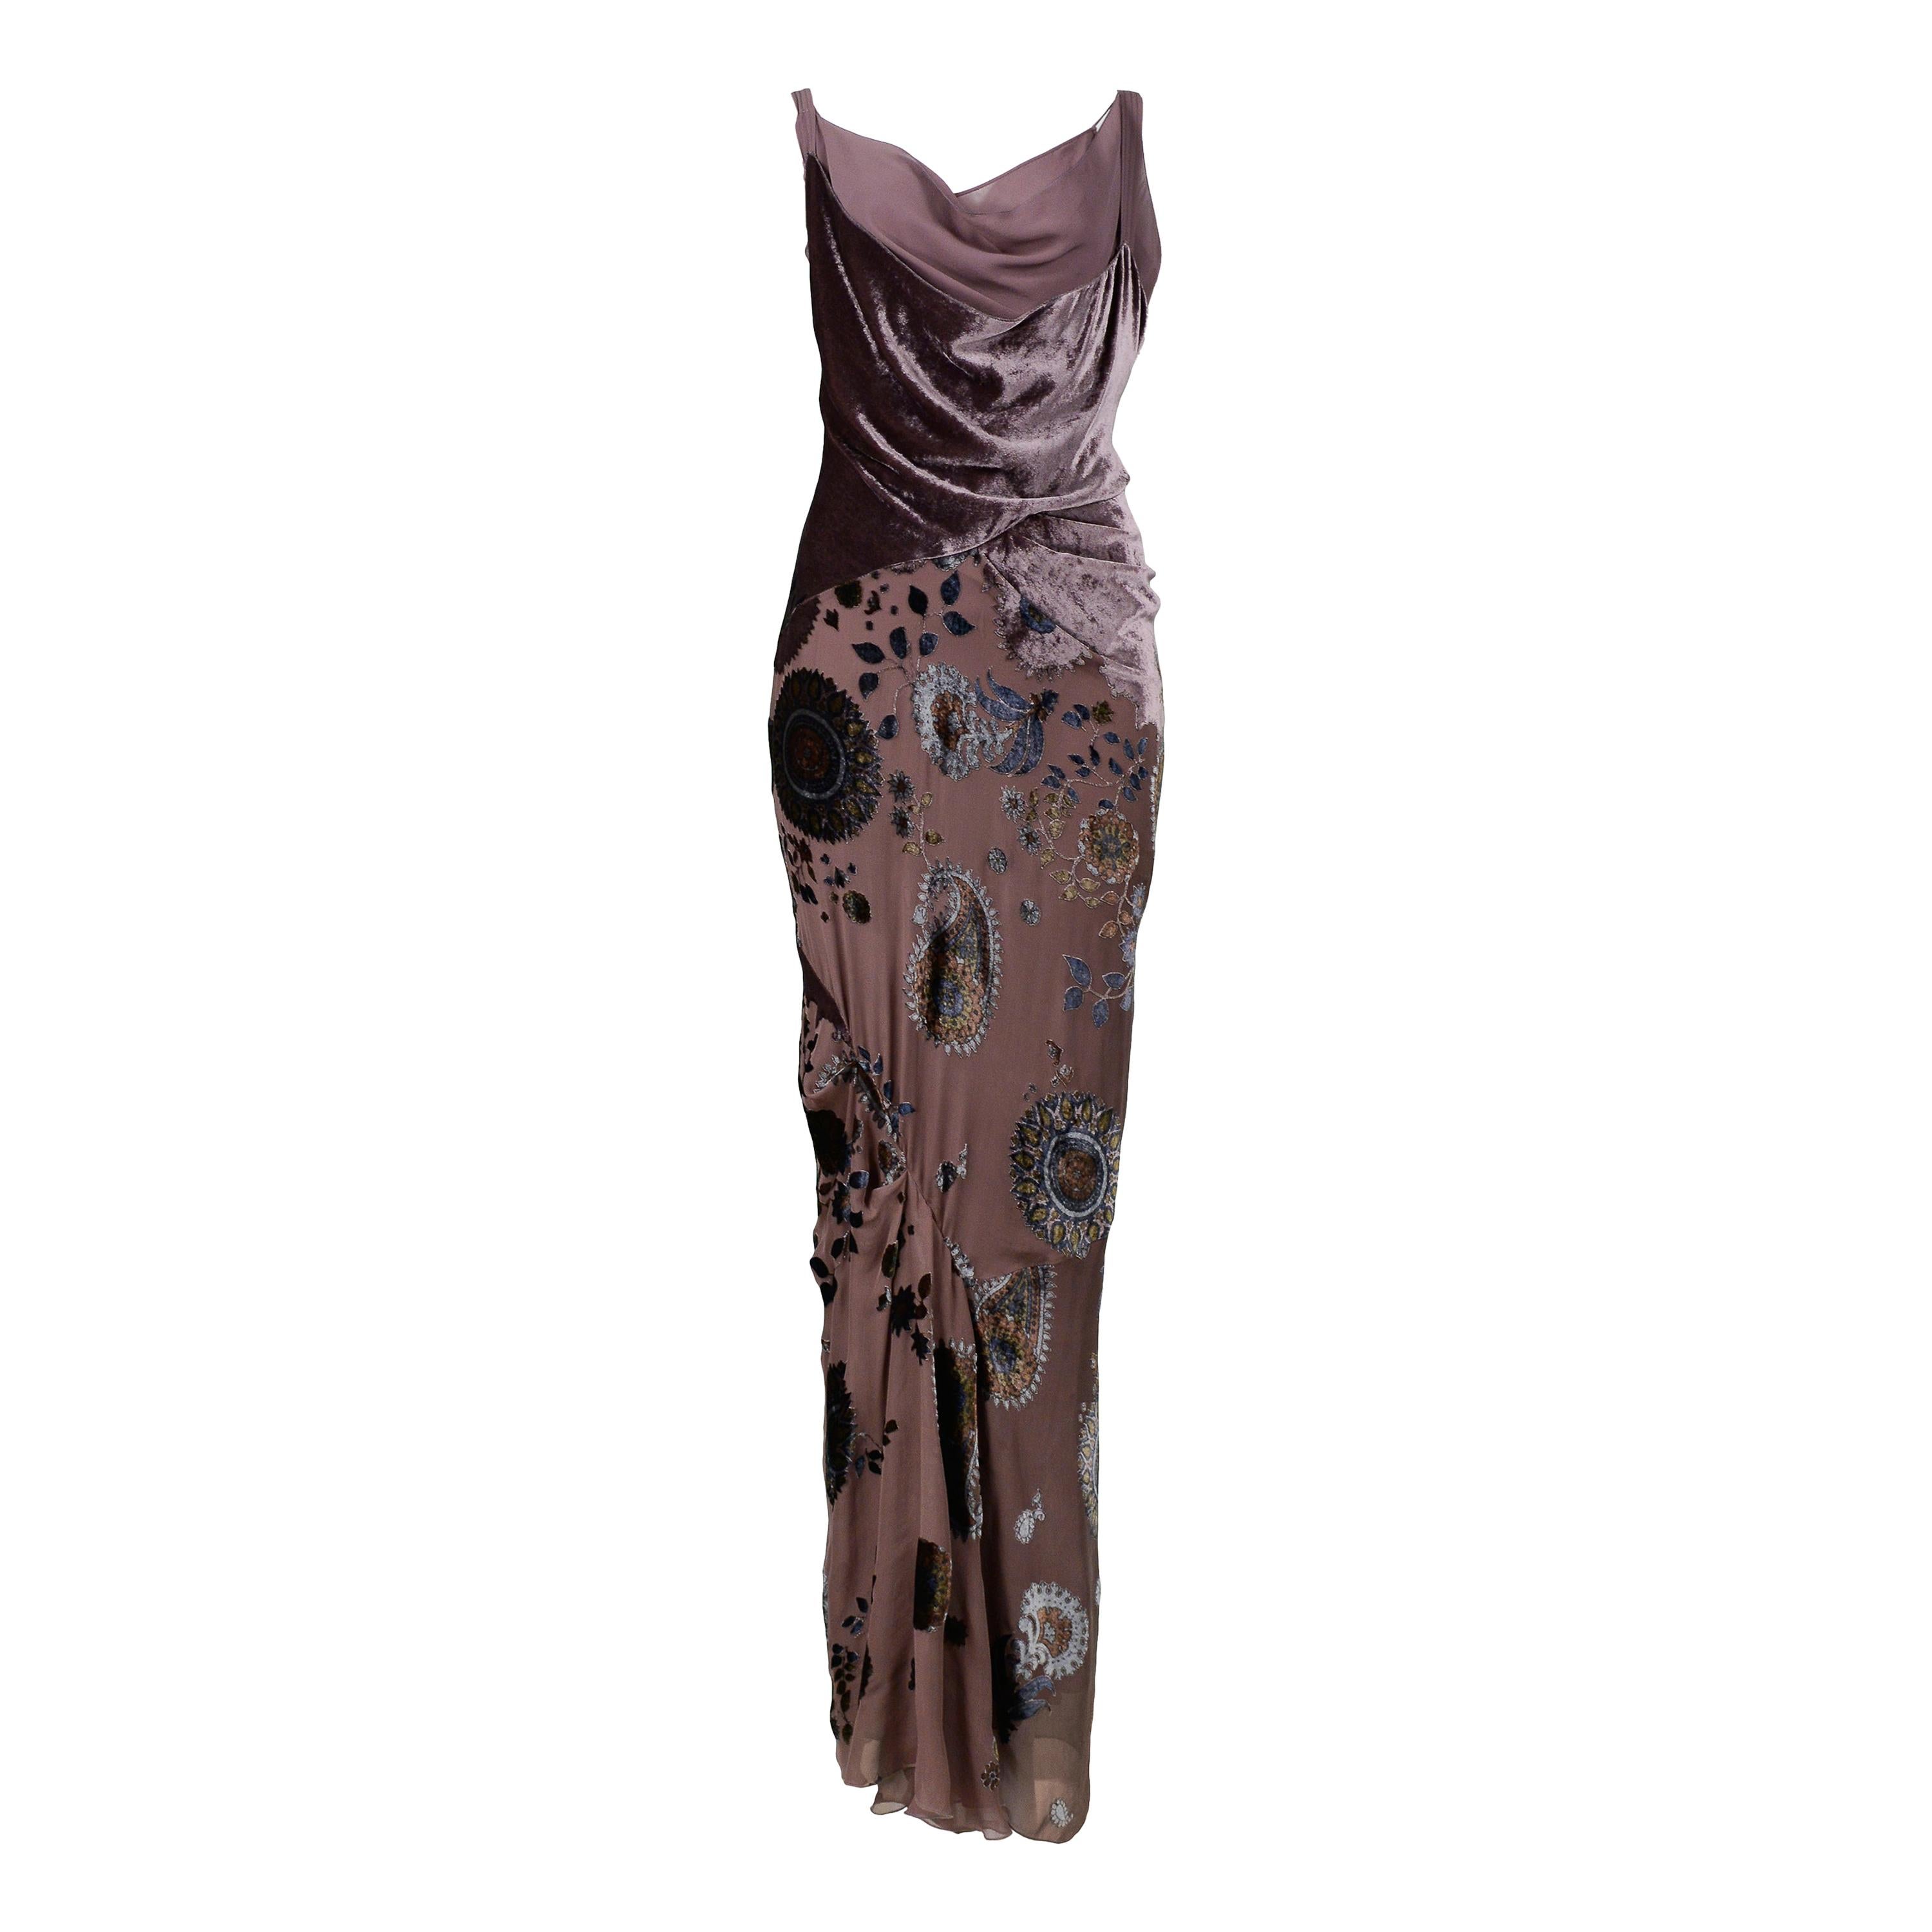 Vintage Christian Dior by Galliano Taupe Velvet Floral Devore Gown